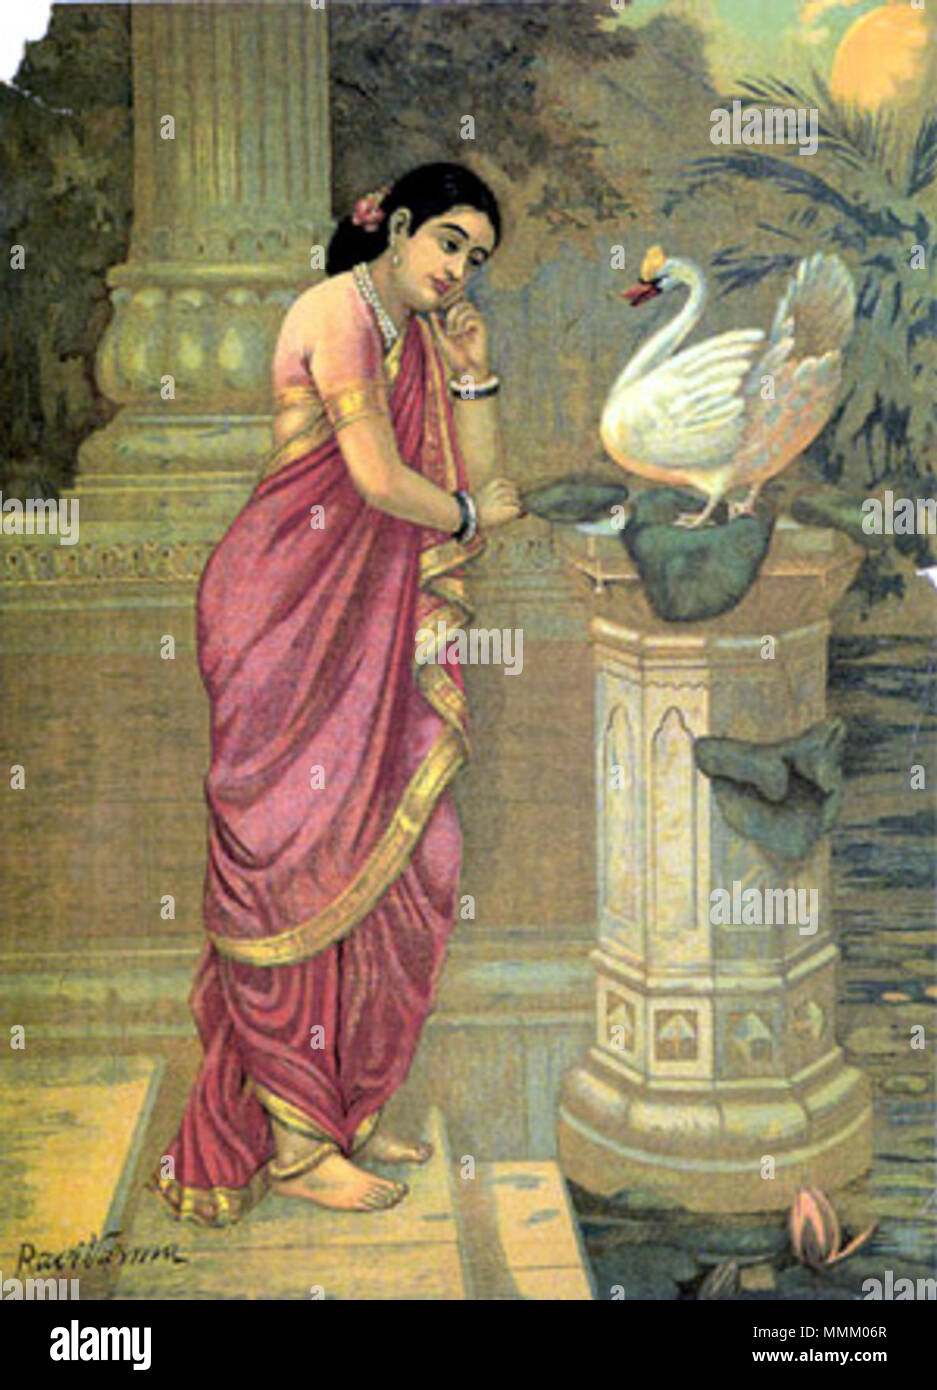 . English: Smith Poster Archive - Damayanti and the Swan Damayanti and the Swan Artist: Ravi Varma Publisher: Ravi-Vijaya Press, Ghatkopar 19' X 13 1/16' H. Daniel Smith Poster Archive, Department of Special Collections, Syracuse University Library, no 0061 This print is the work of the Kerala artist Ravi Varma (d. 1906), a founding figure in the tradition of prints and colored lithographs. This poster portrays an episode from the epic, Mahabharata, in which a swan tells Damayanti about the excellent qualities of Nala, King of Nishadha. The poster is reminiscent of Western representations of t Stock Photo